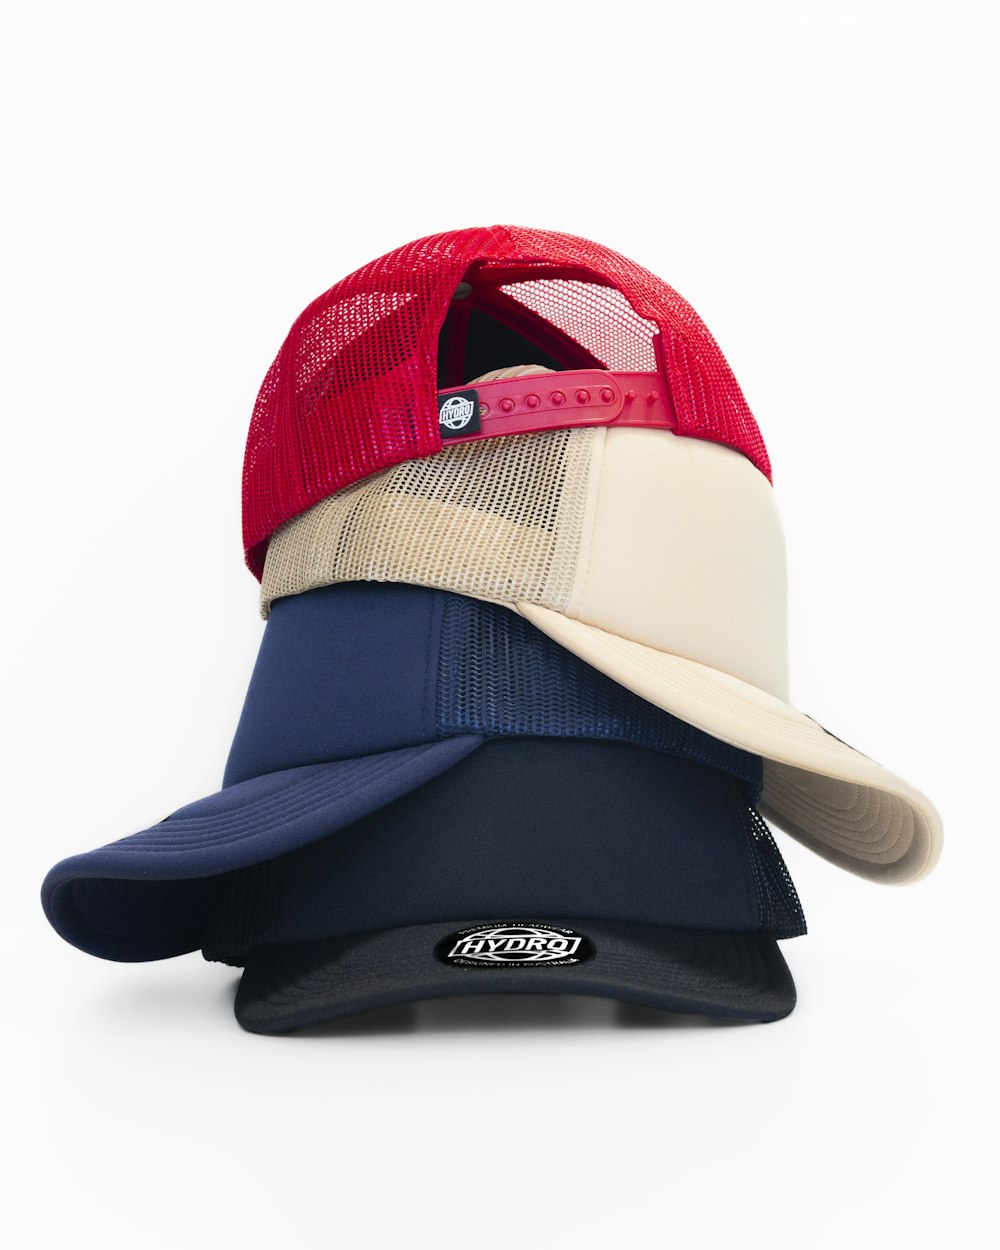 three hats stacked on top of each other